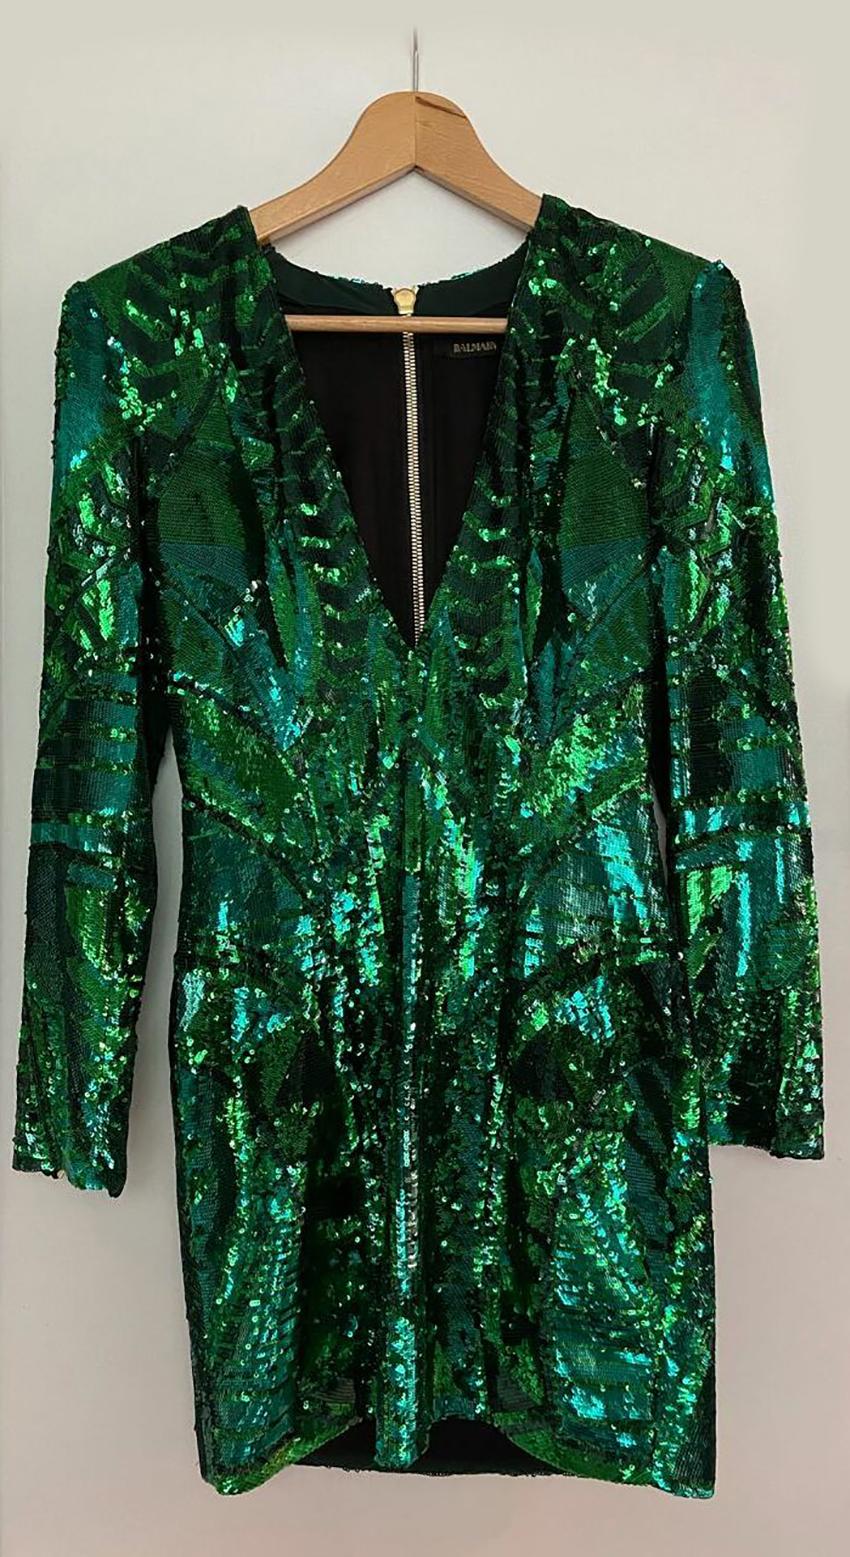  BALMAIN


Cocktail evening Green color Sequins dress

Back zip closure 

Deep V- neck

Long sleeves with zip closure

 
Trim: Sequins


Size 36 or US 4



Made in China

Pre-owned. Perfect condition

 100% authentic guarantee 

       PLEASE VISIT